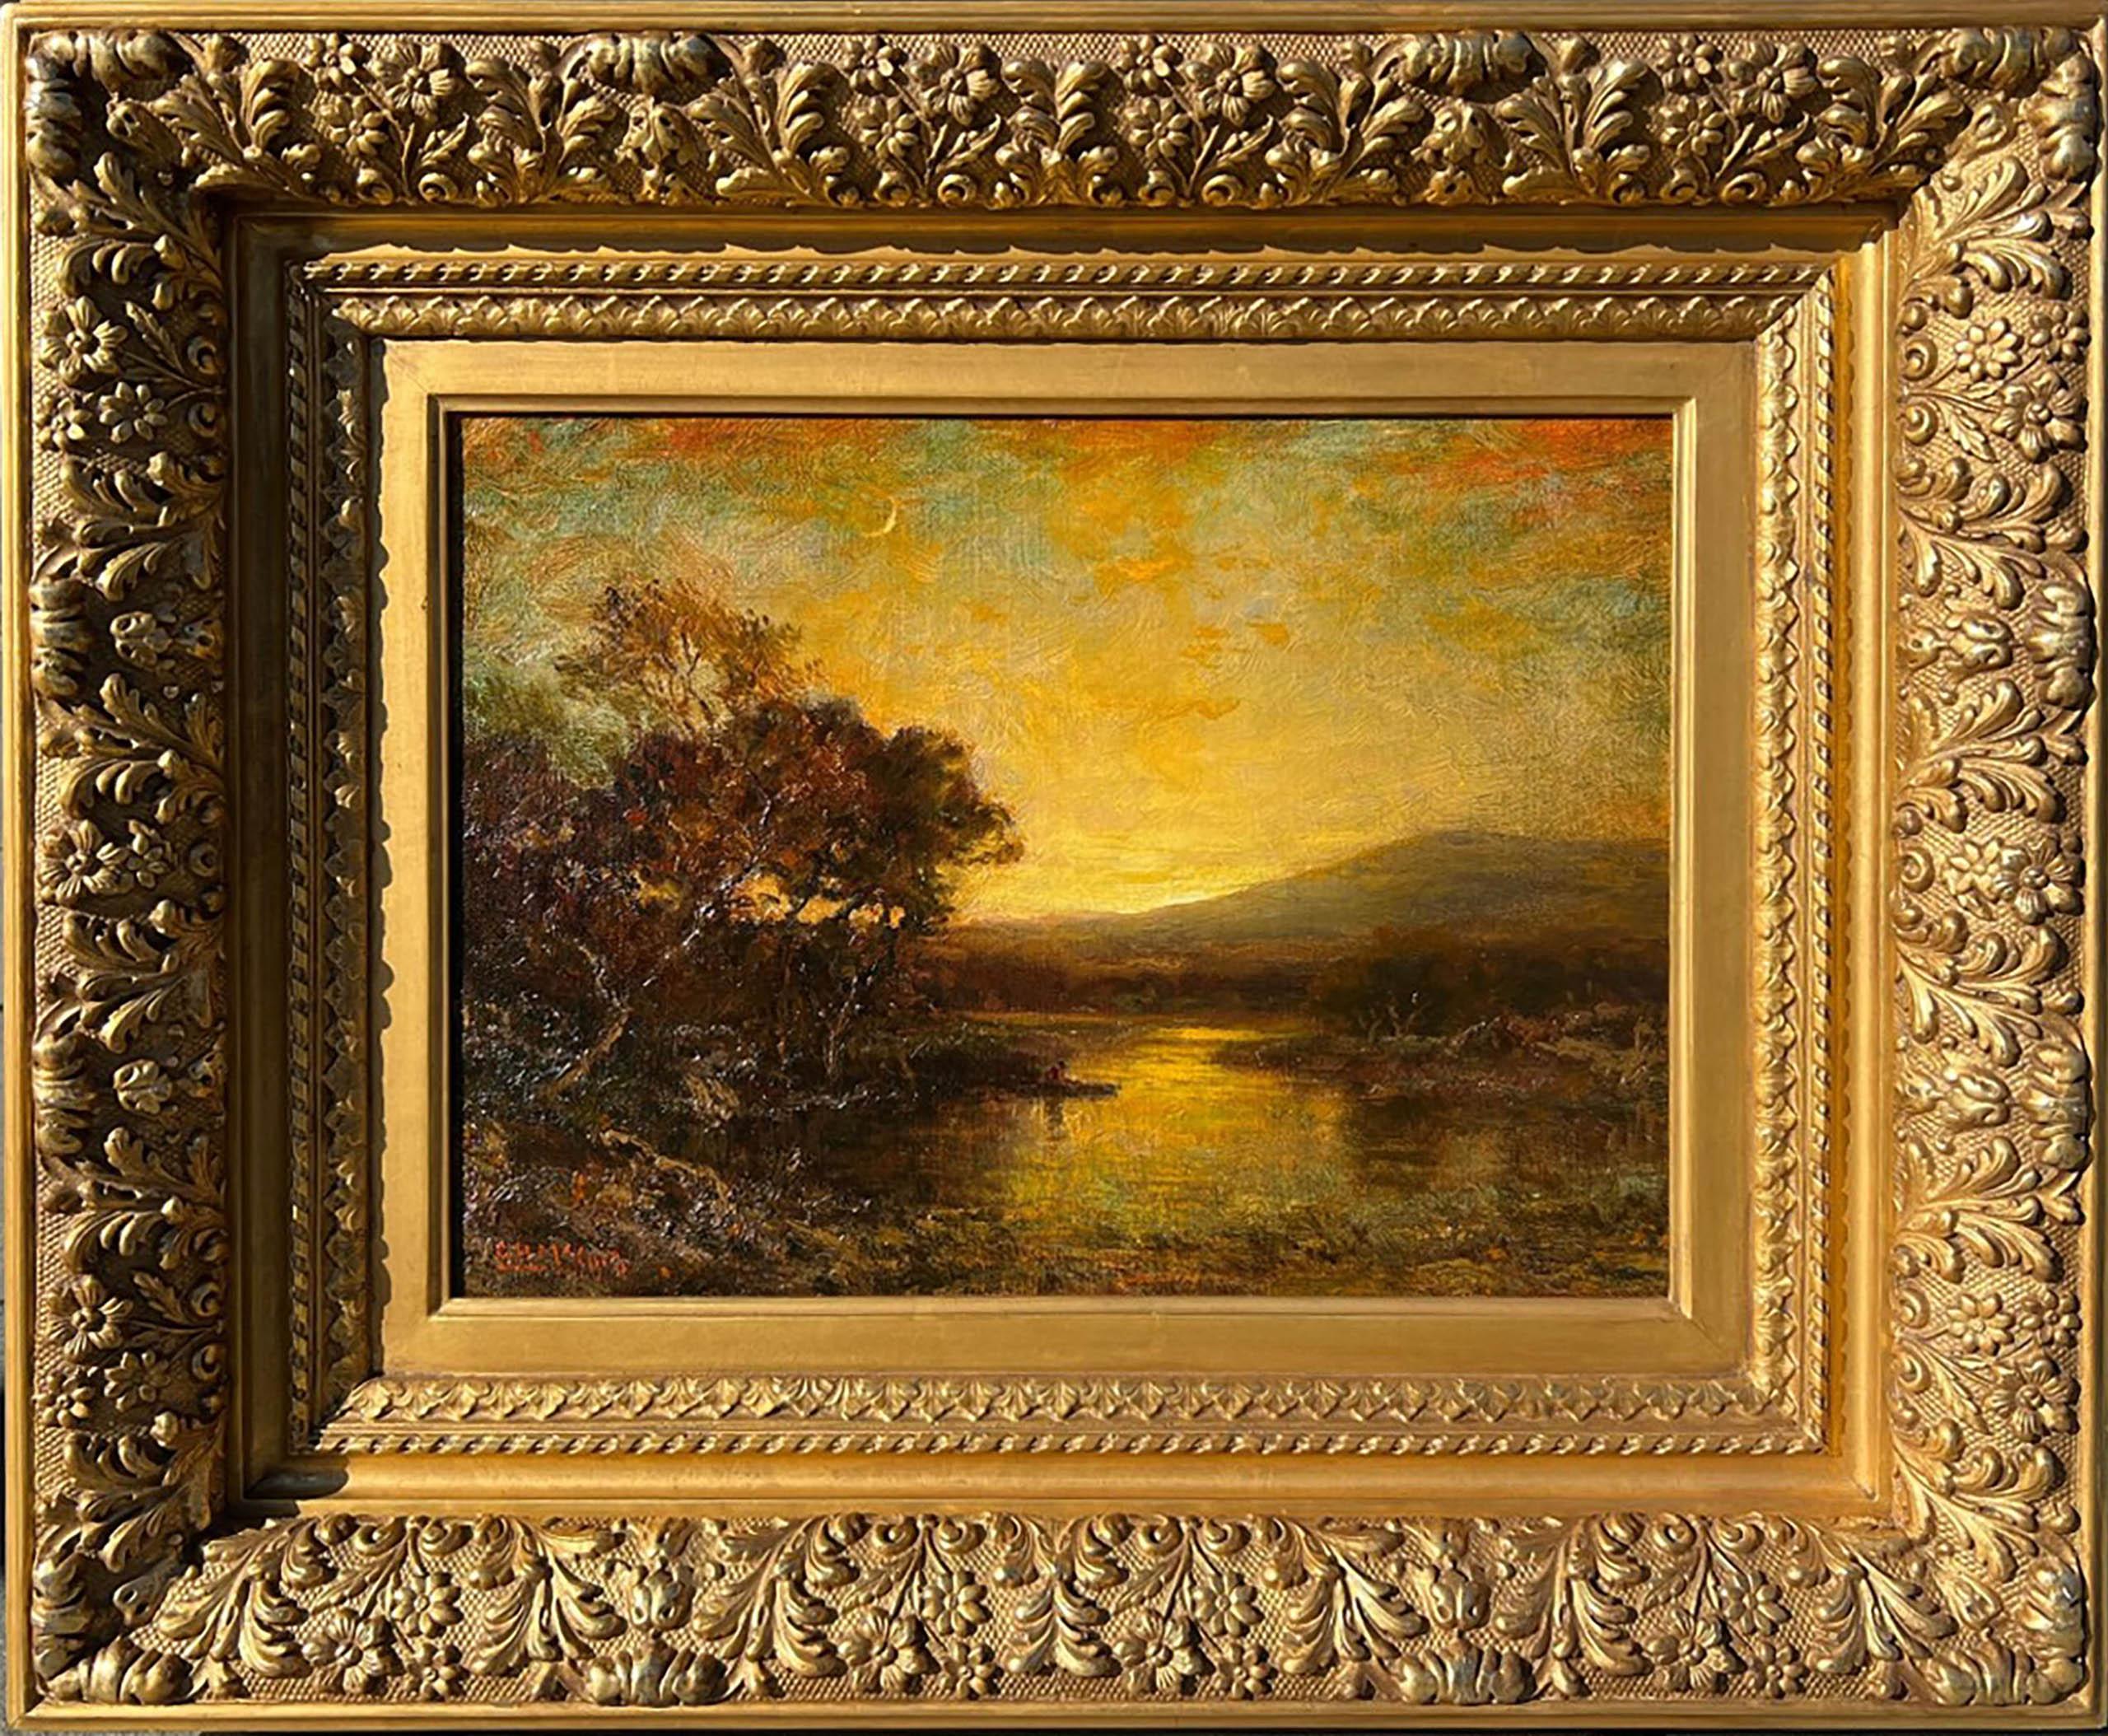 Tonalist sunset painting by American artist George Herbert McCord (1848-1909), "Boating at Sunset" depicts a lone figure boating on a body of glimmering water as the sun sets behind a mountain. A crescent moon is depicted at upper left.  Painted in